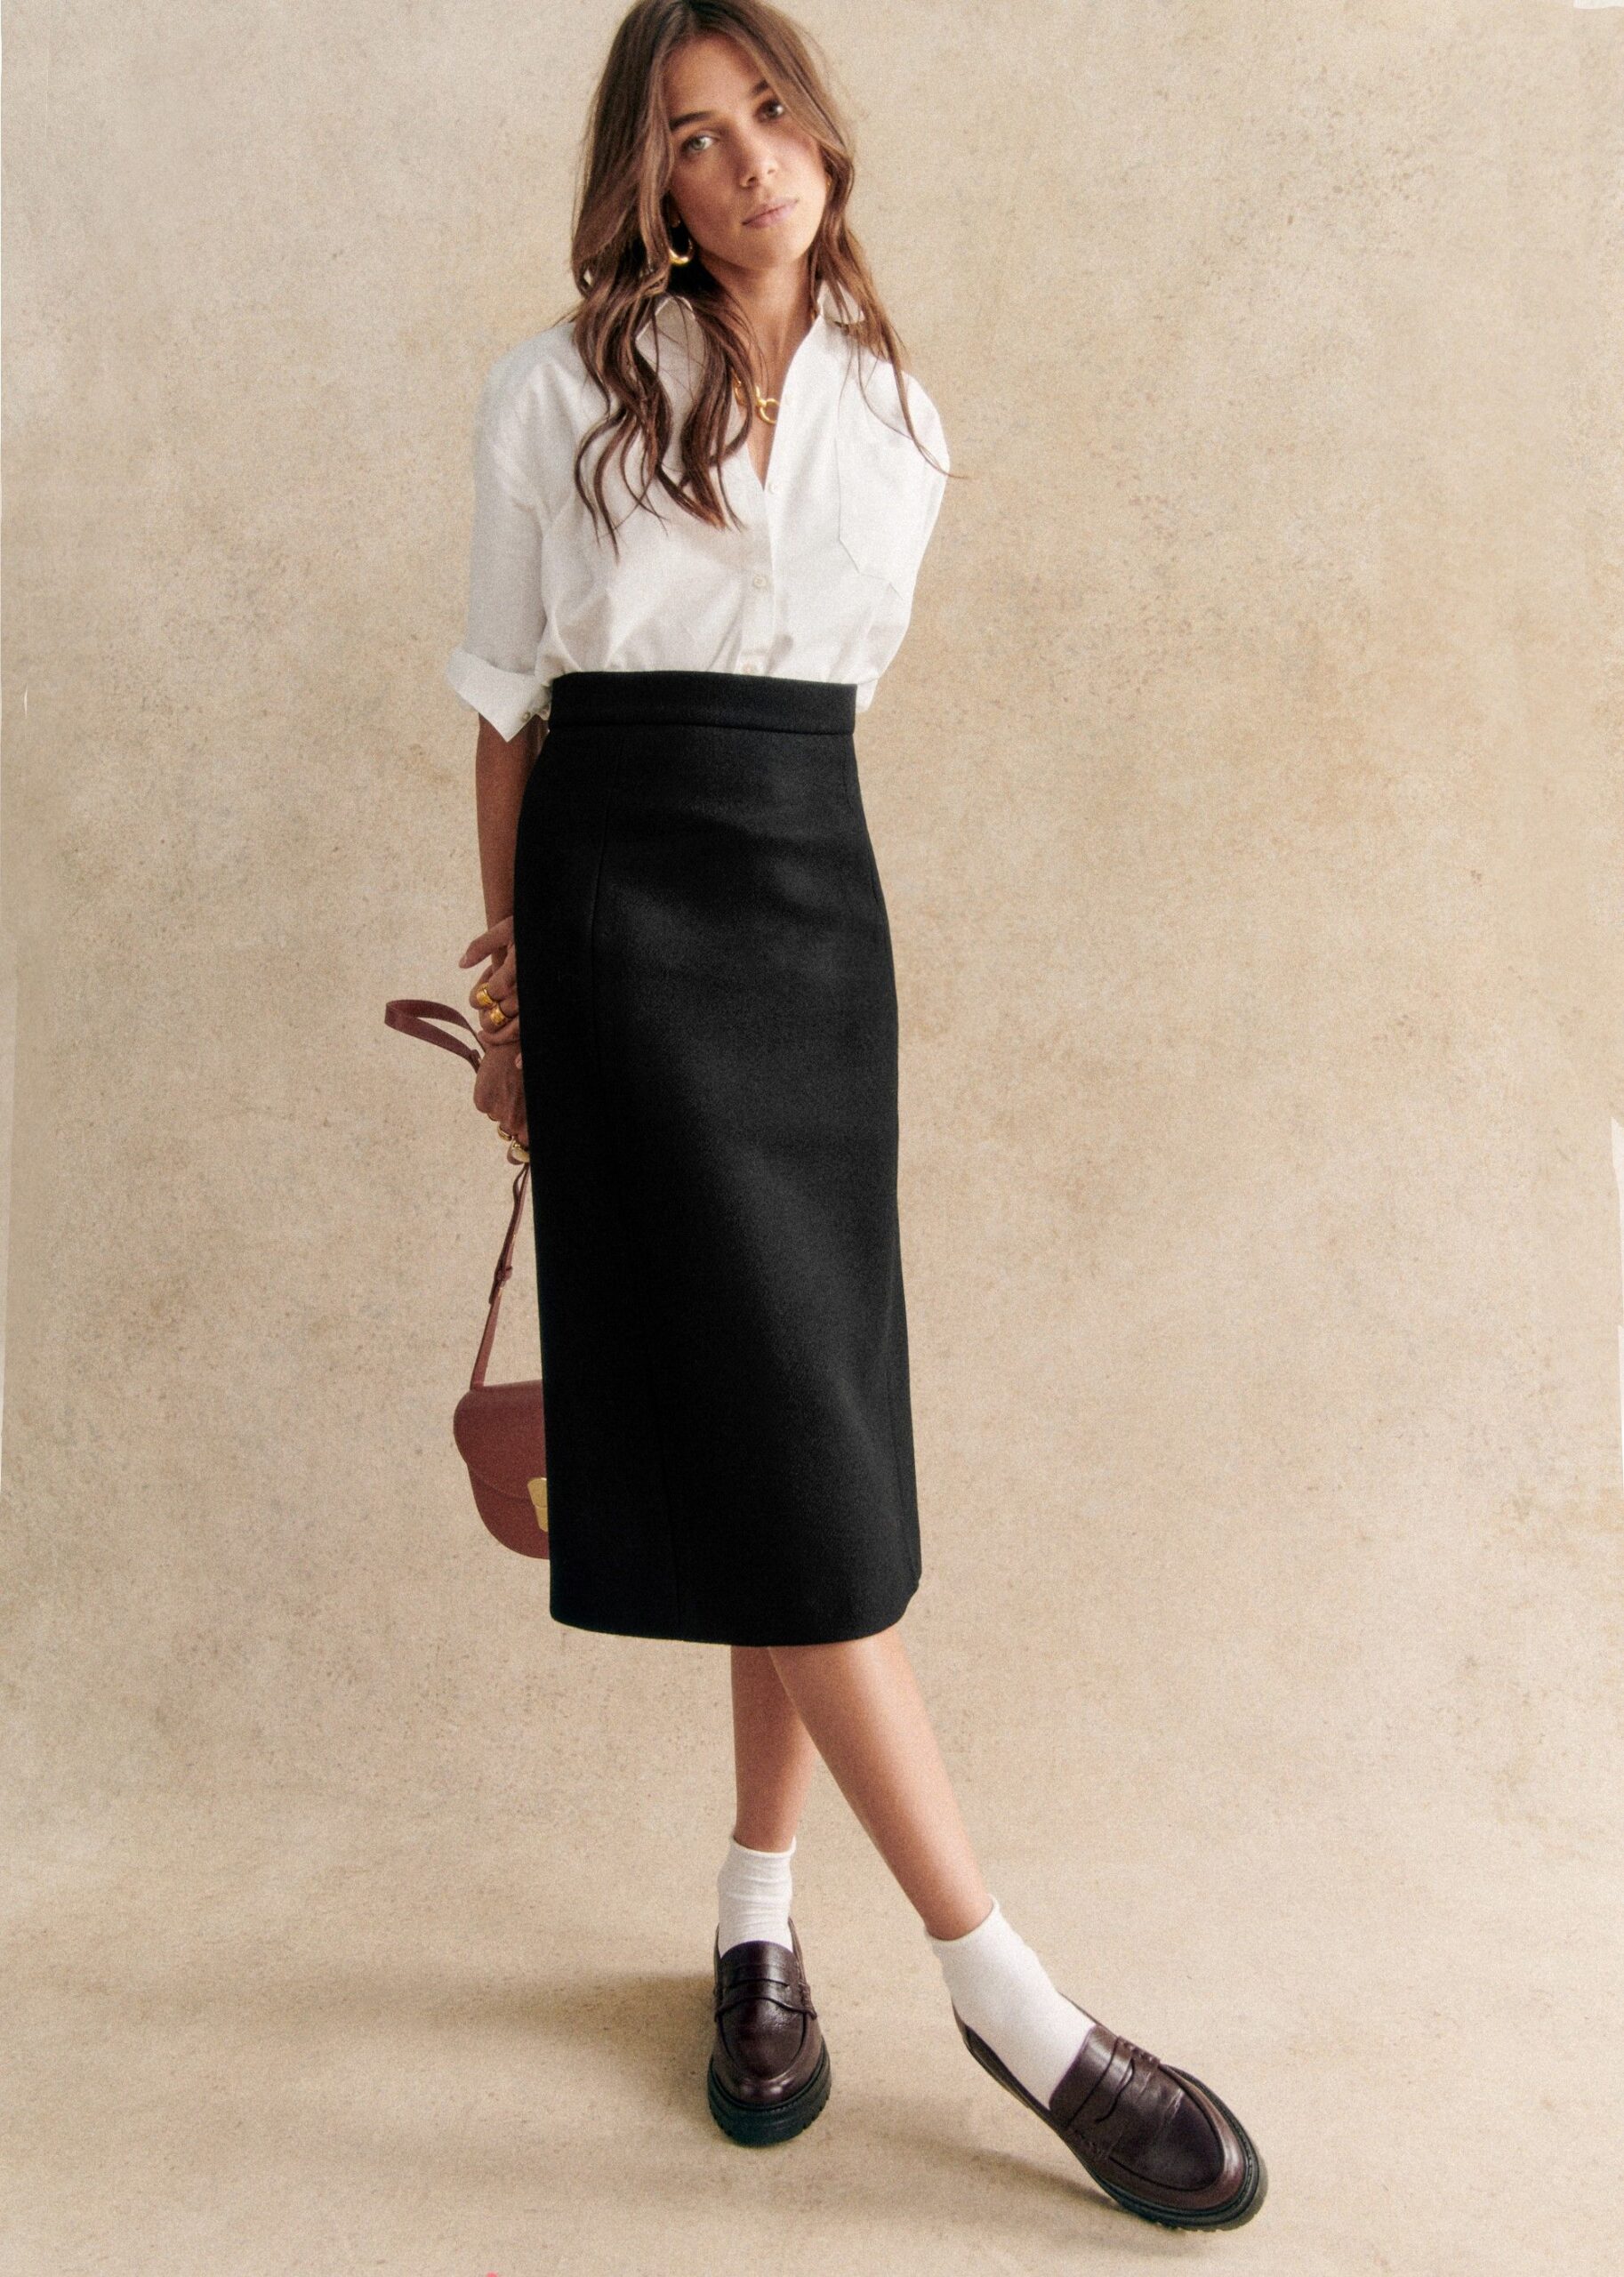 Timeless Sophistication: Styling Tips for Straight Skirts